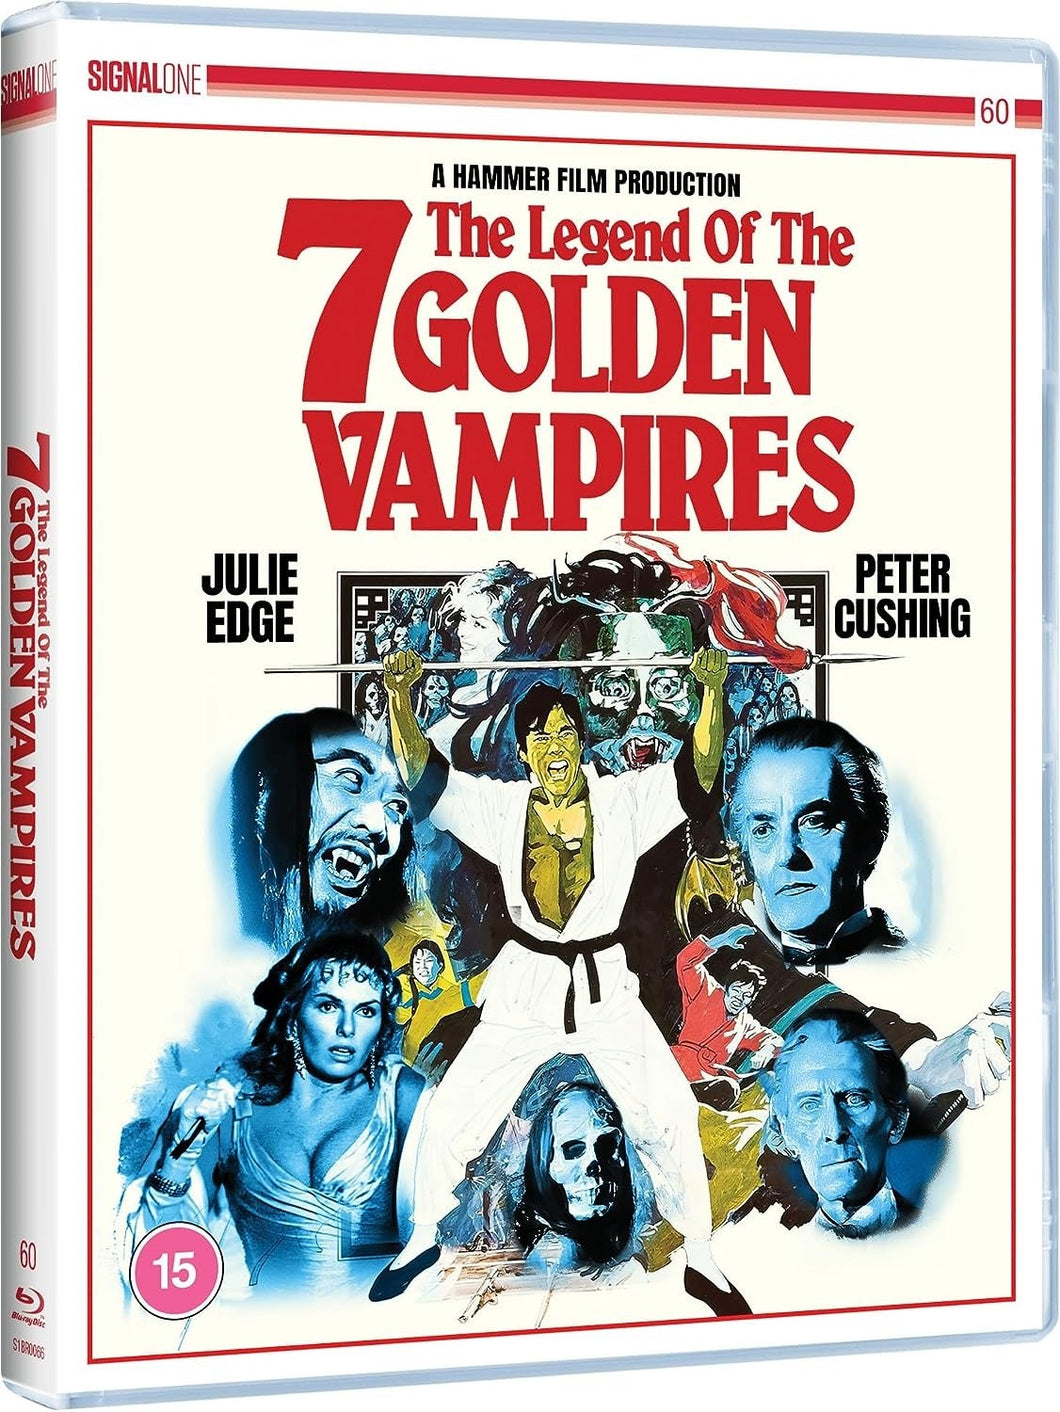 The Legend of the 7 Golden Vampires (1974) - front cover